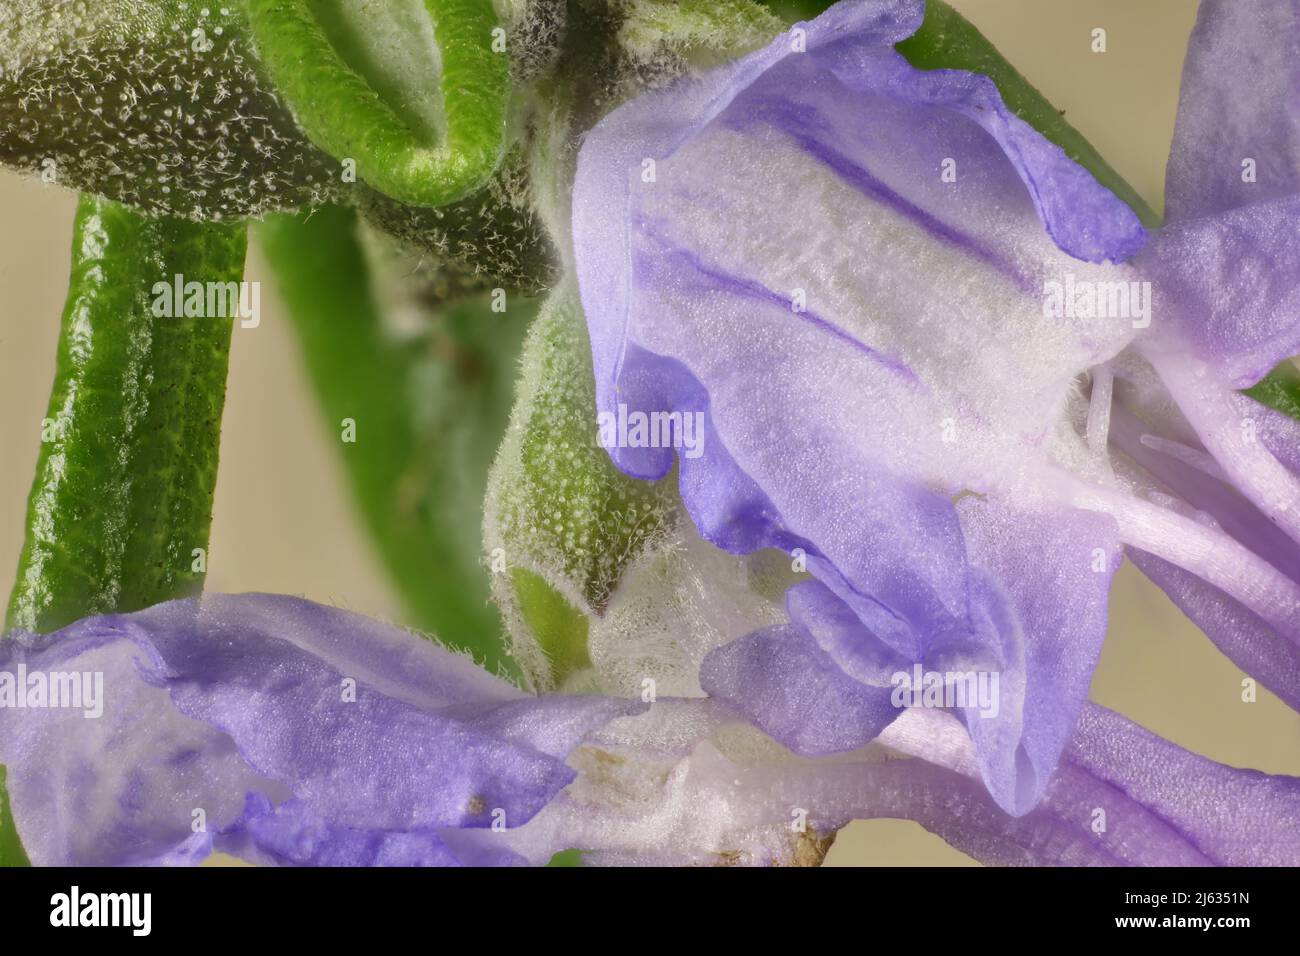 Macro view of isolated lavender flowers and foliage Stock Photo